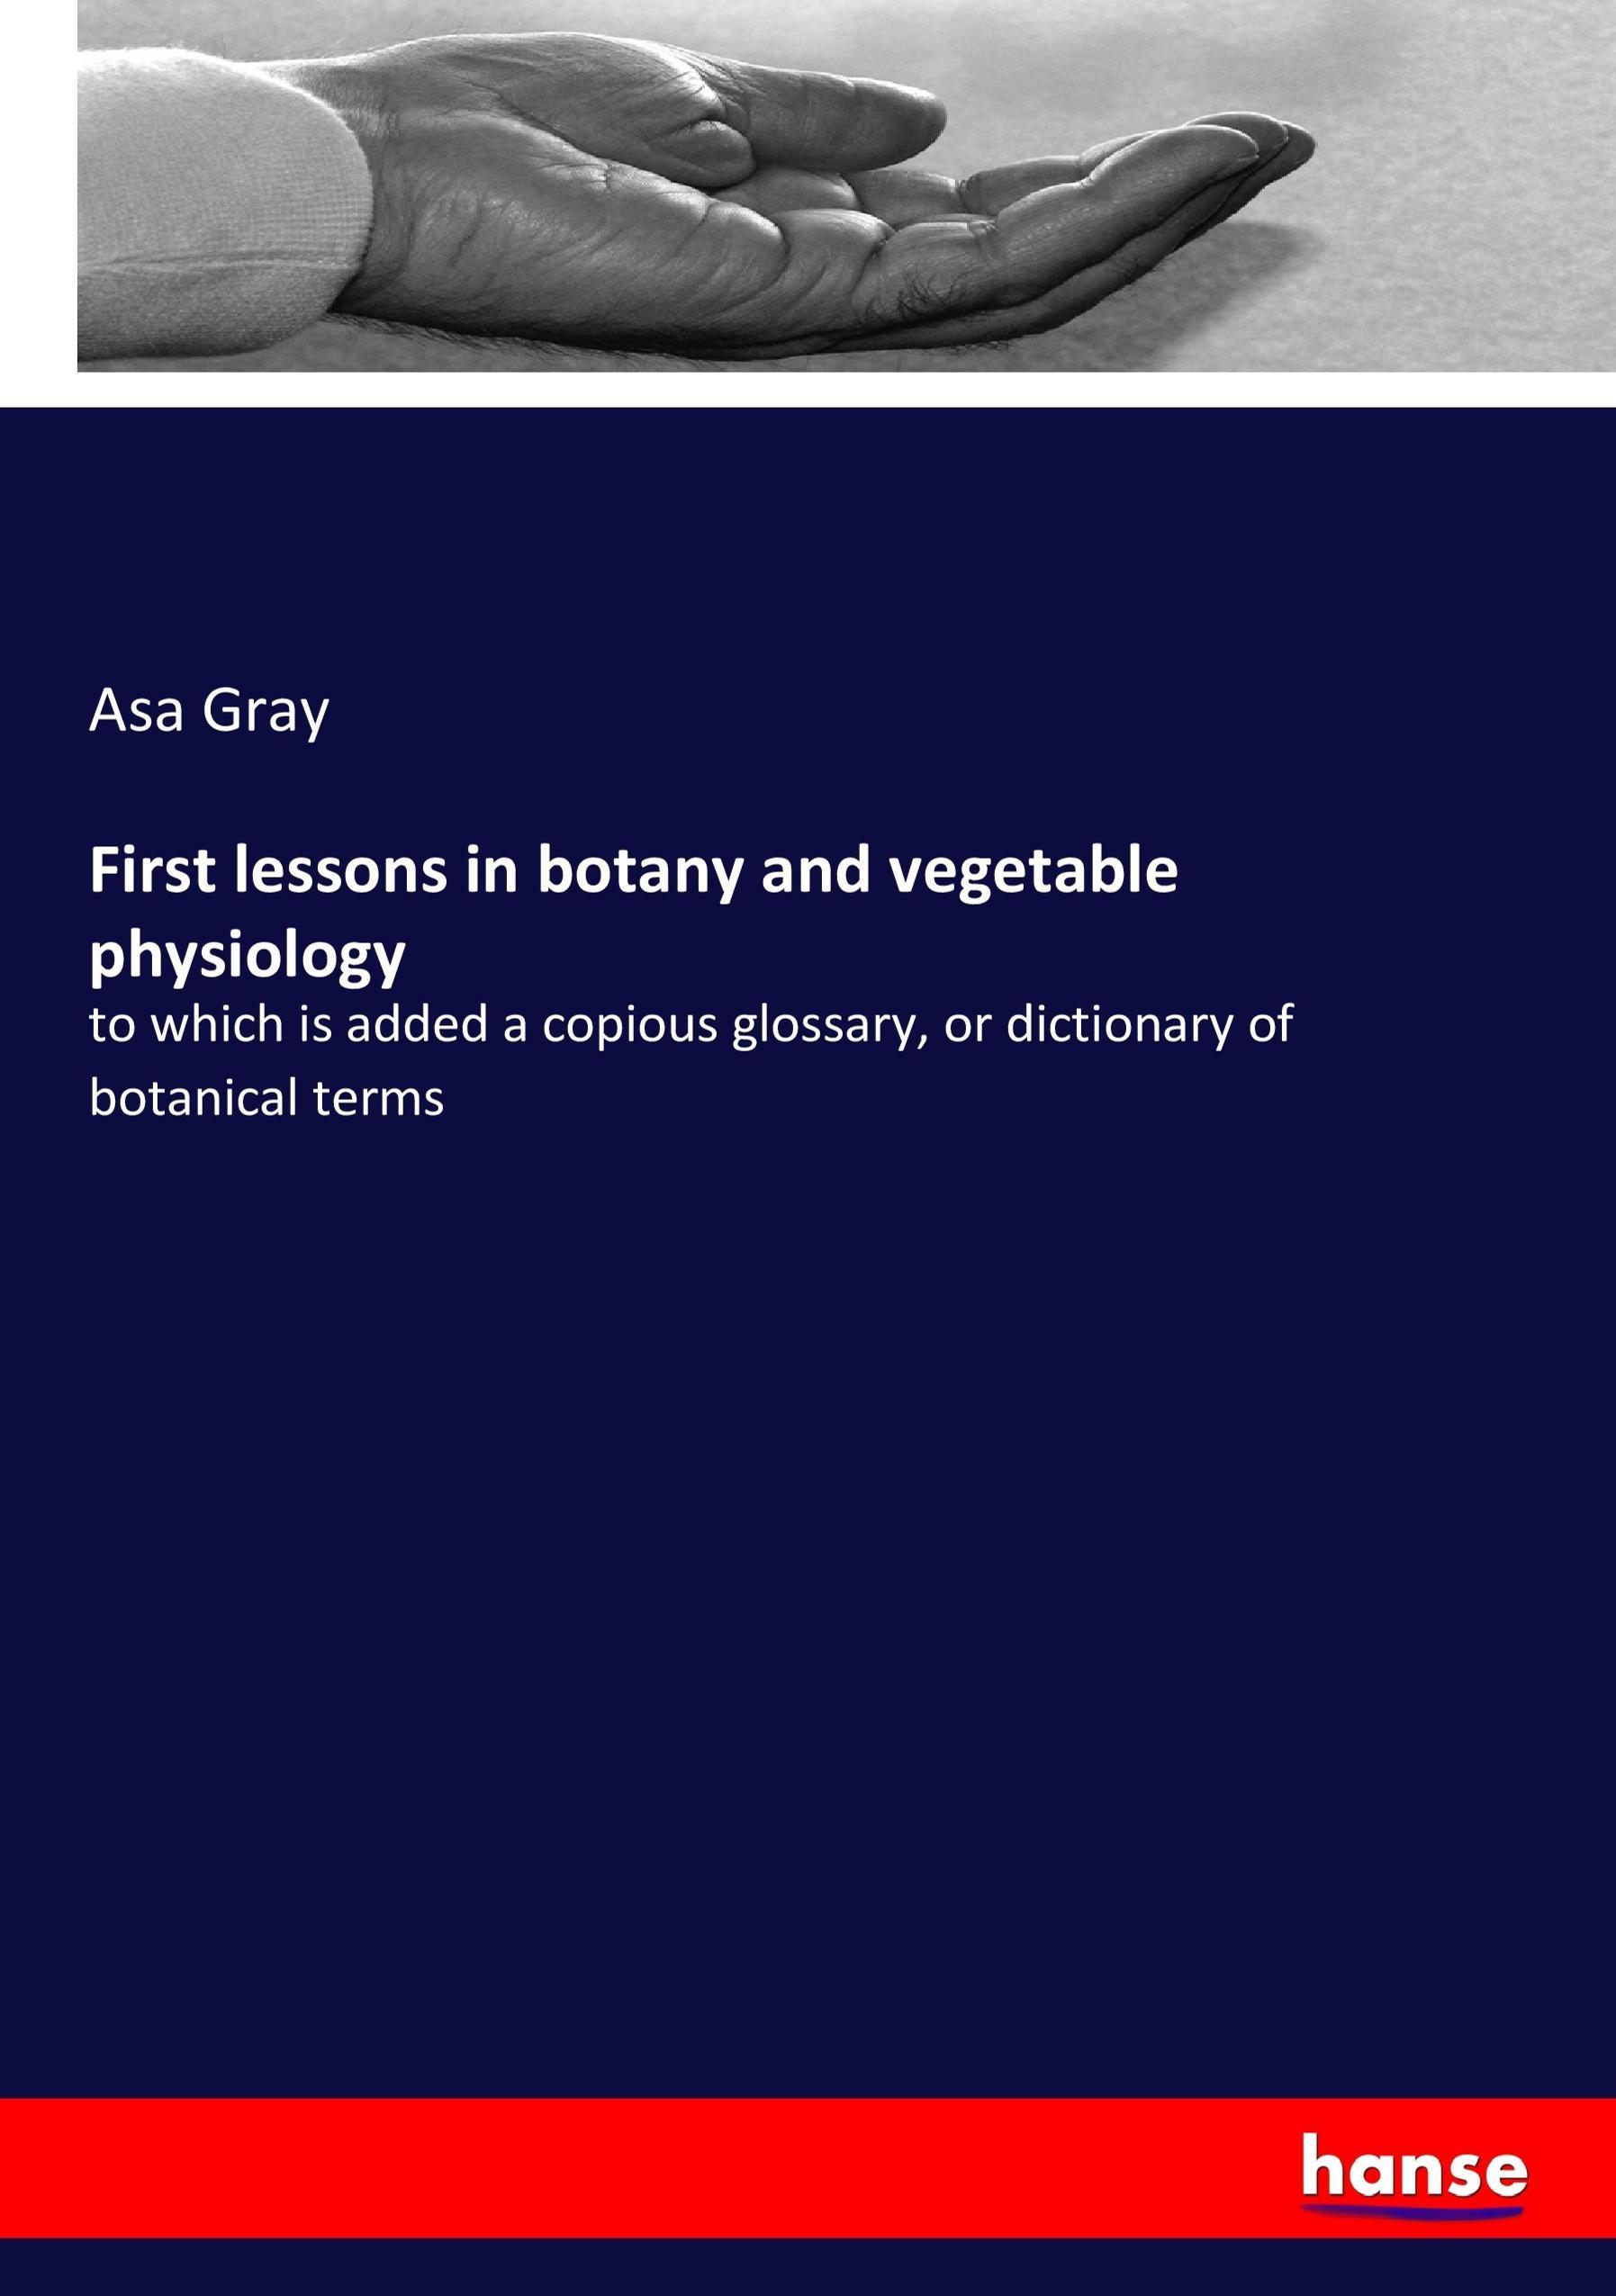 First lessons in botany and vegetable physiology - Gray, Asa